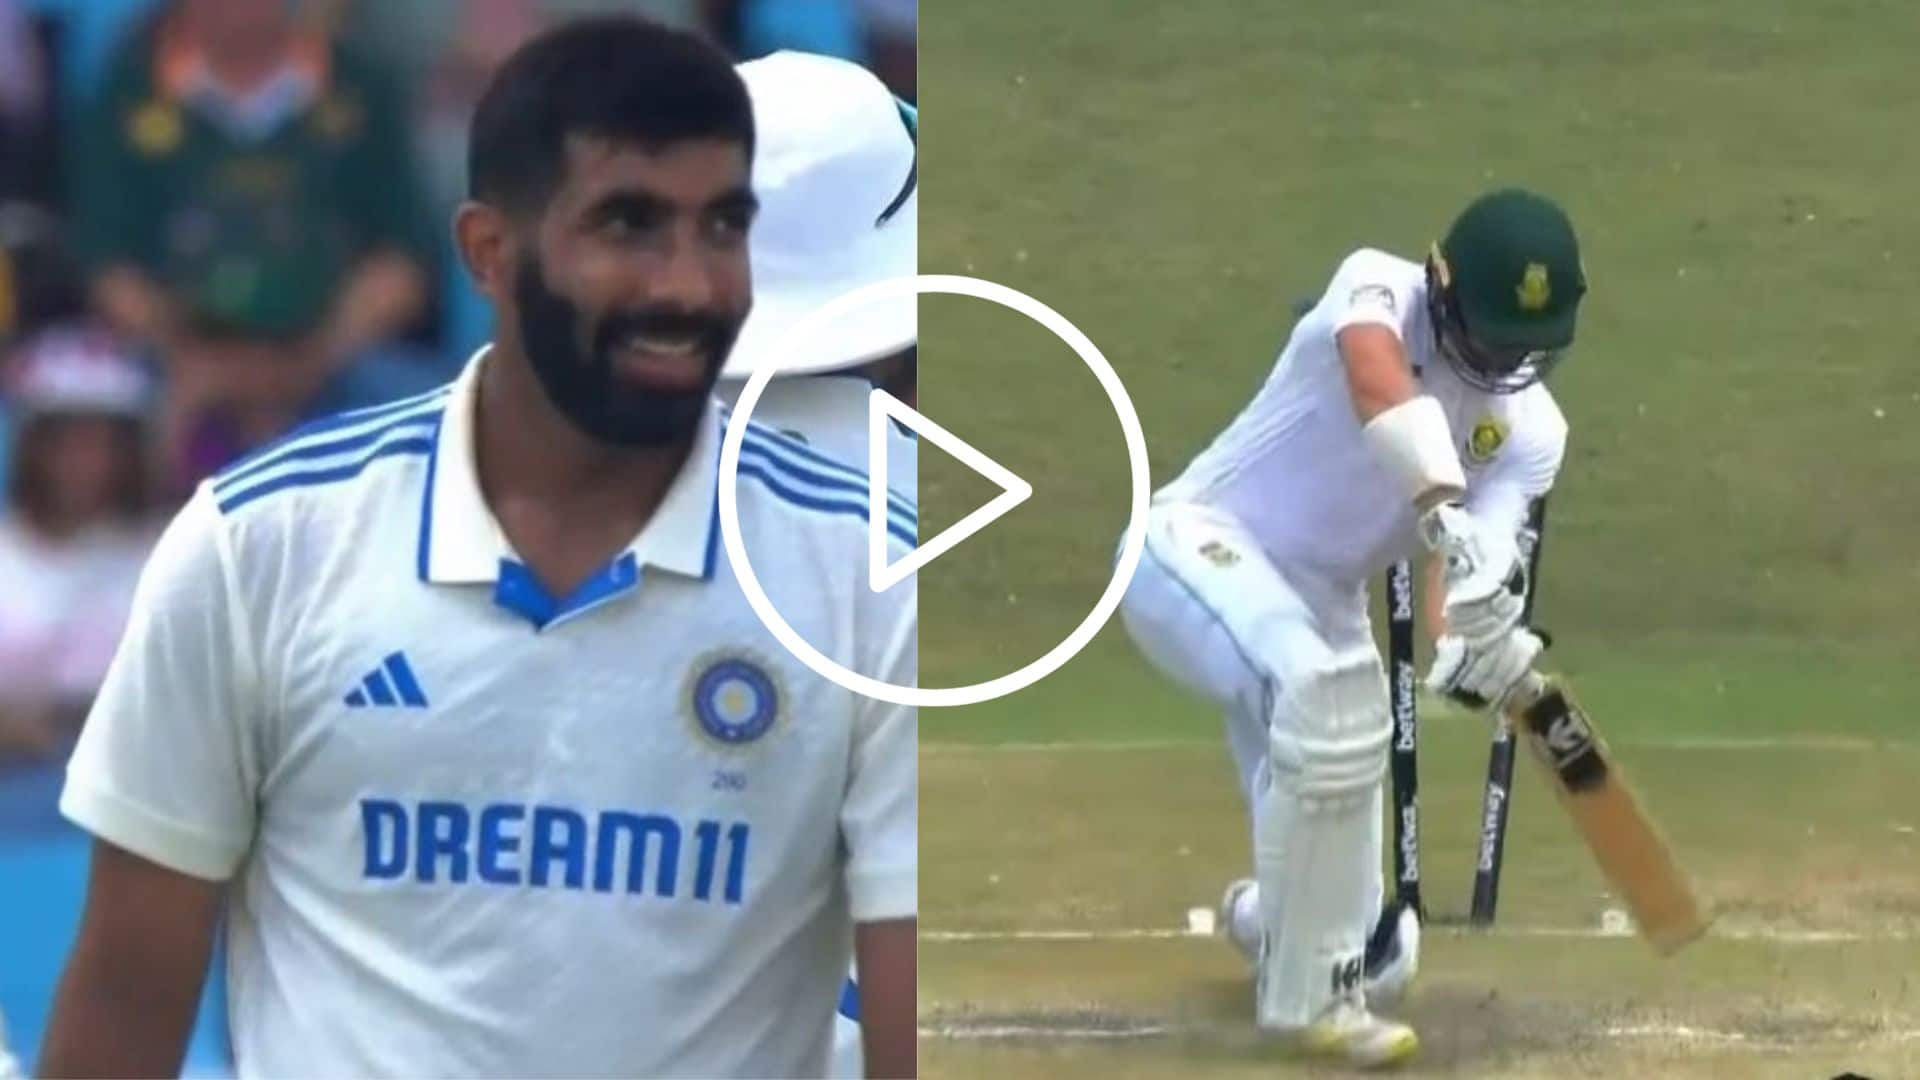 [Watch] Jasprit Bumrah's 'Dangerous' Yorker Folds Up South Africa For 408